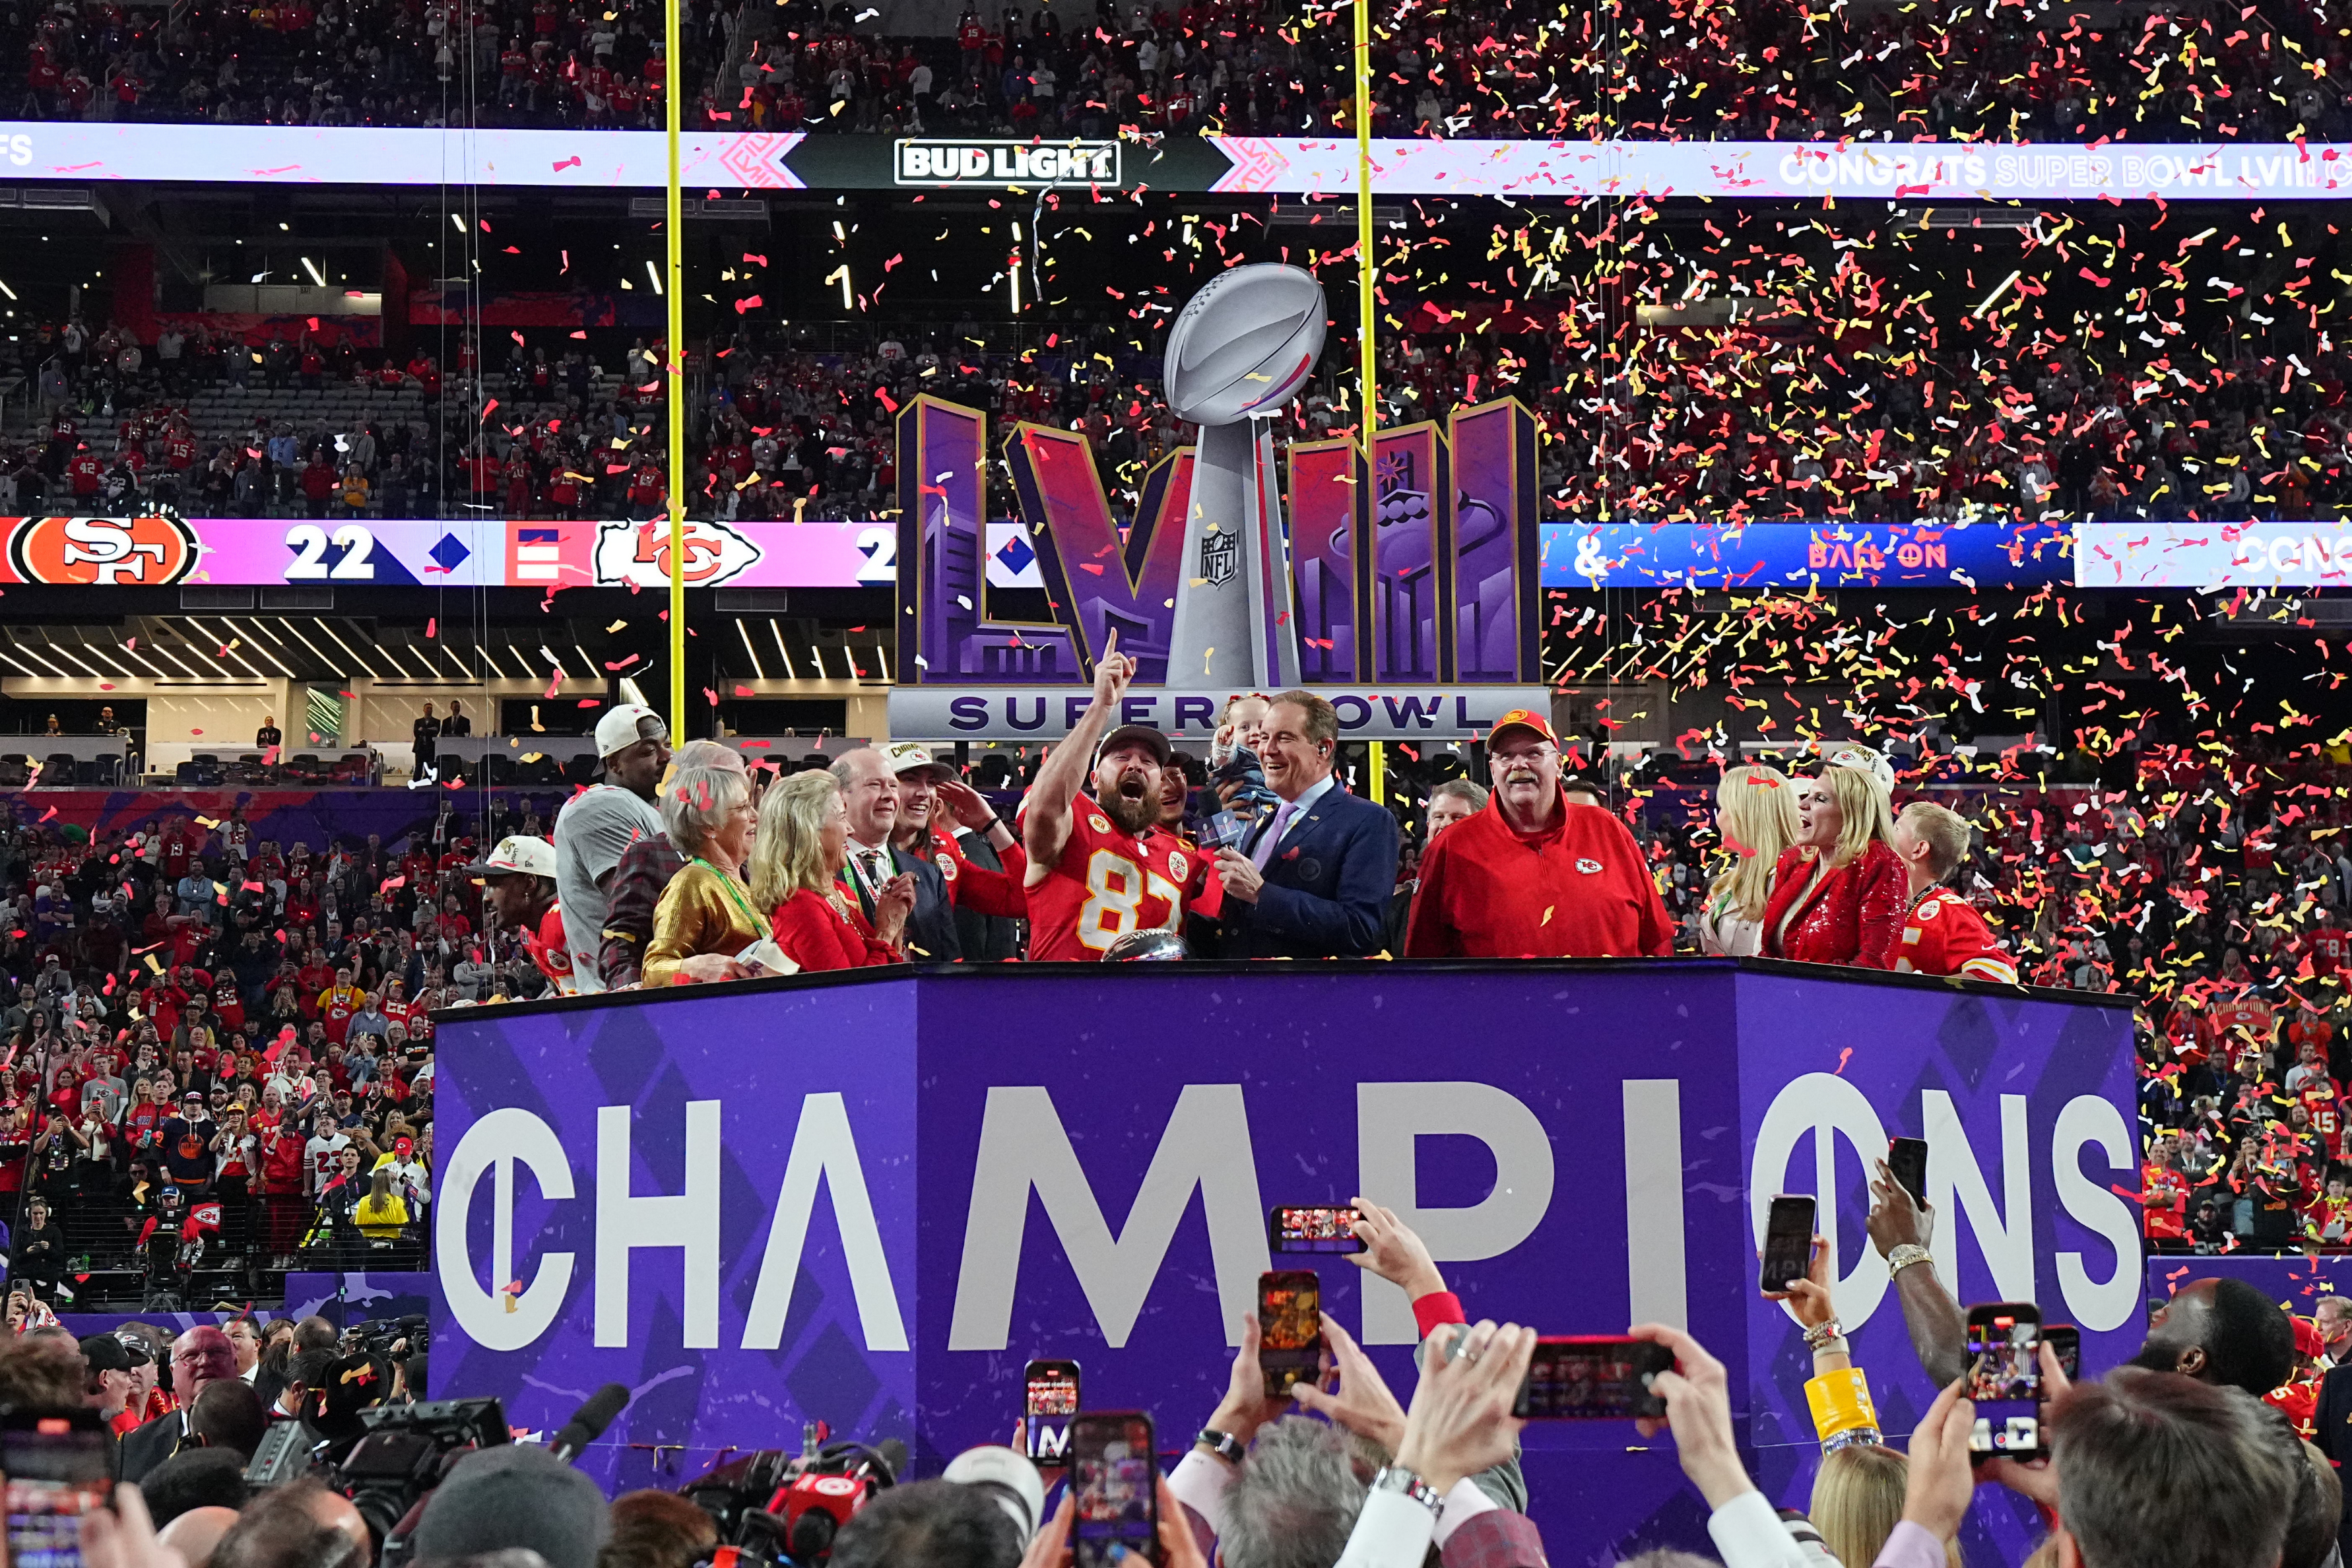 The trophy presentation ceremony from the Super Bowl